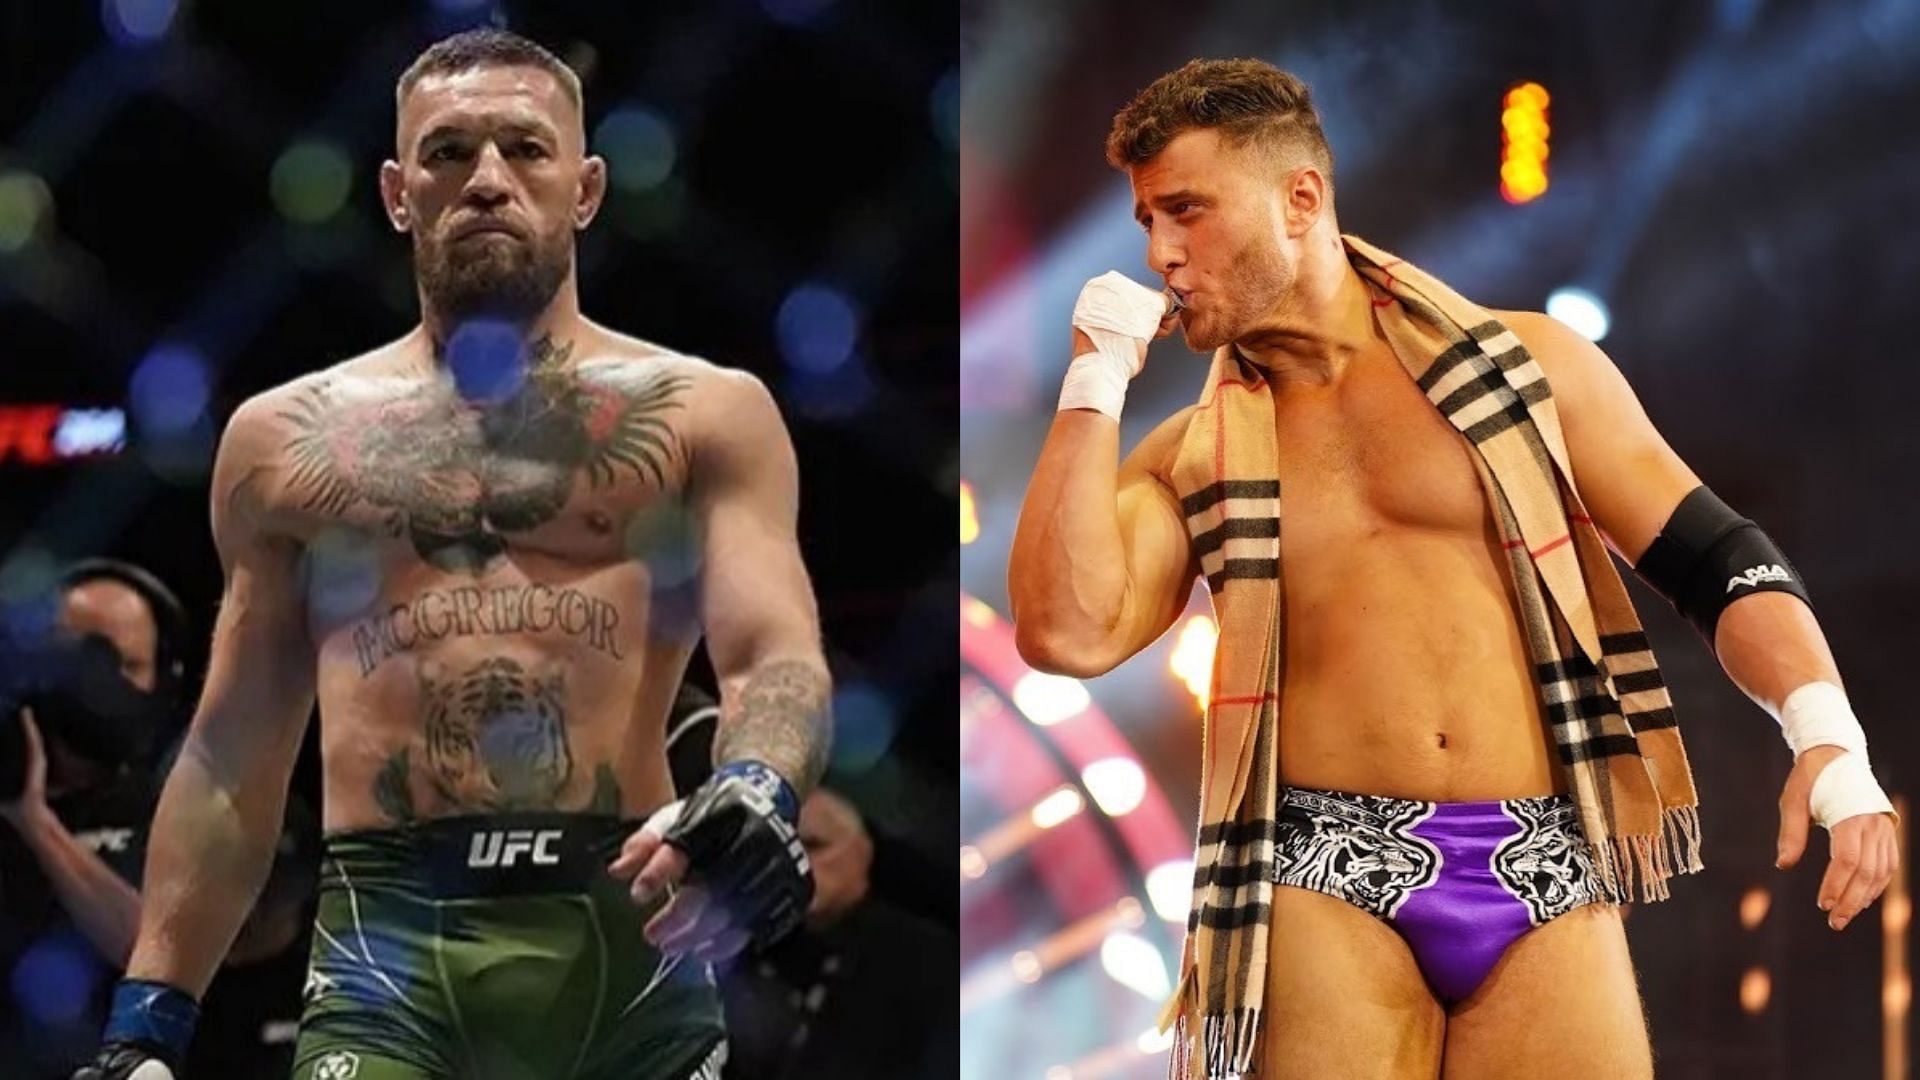 Conor McGregor recently got into an altercation with MJF